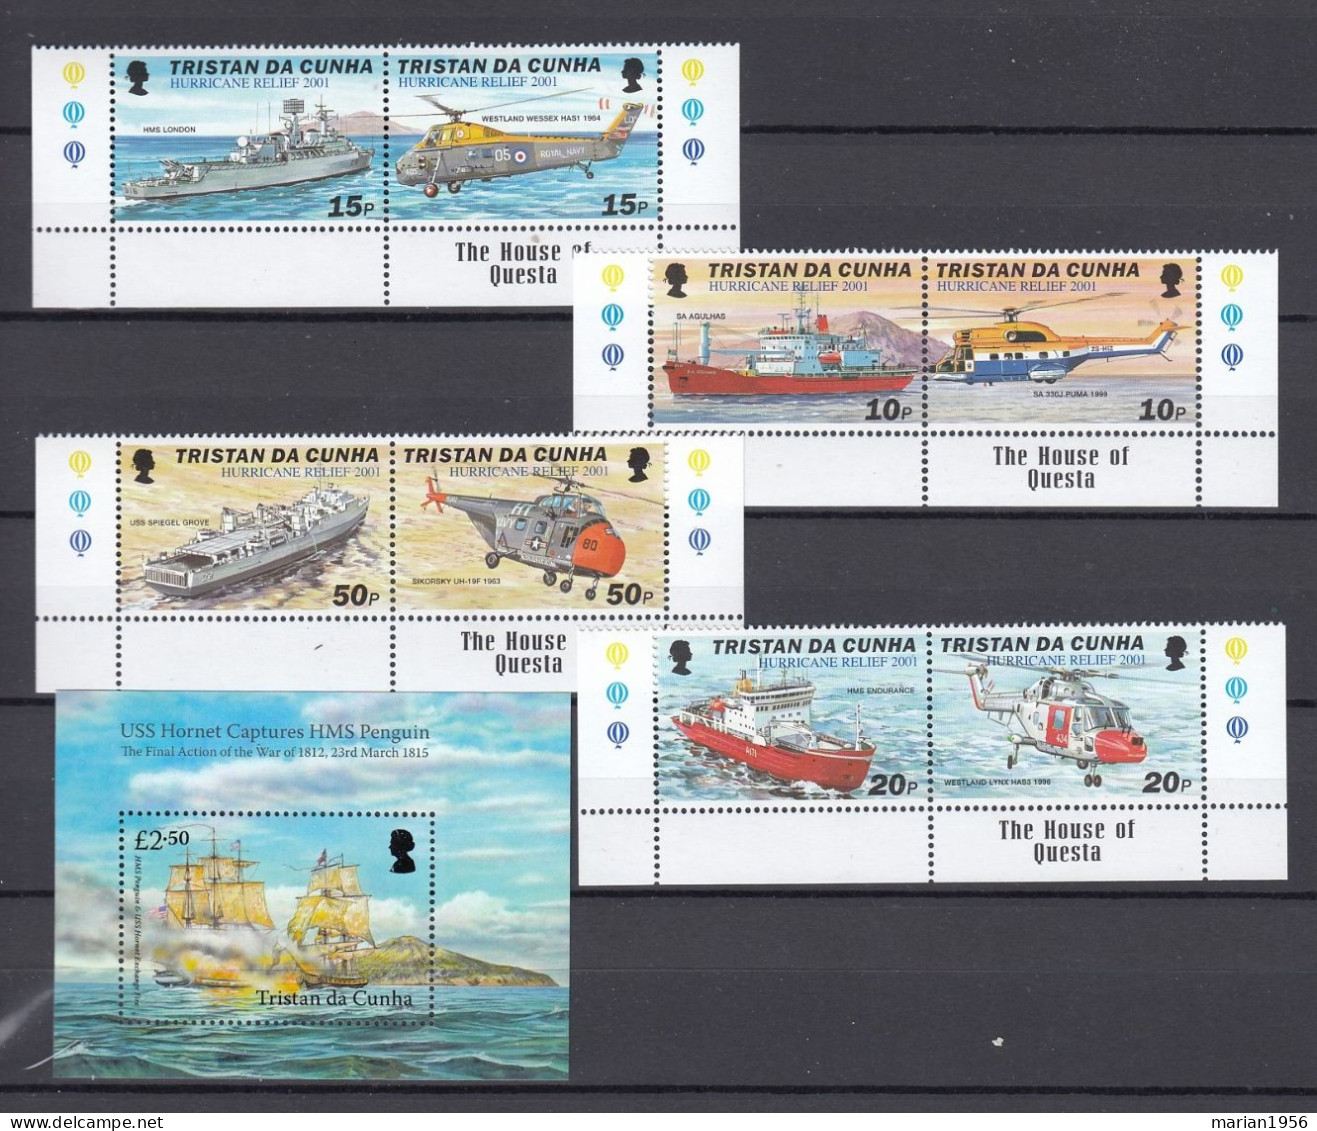 Tristan Da Cunha - Transport - NAVIRE,HELICOPTERES,BATEAUX - Mich.695/02 + BF - 35 Eur. - MNH - Other (Sea)